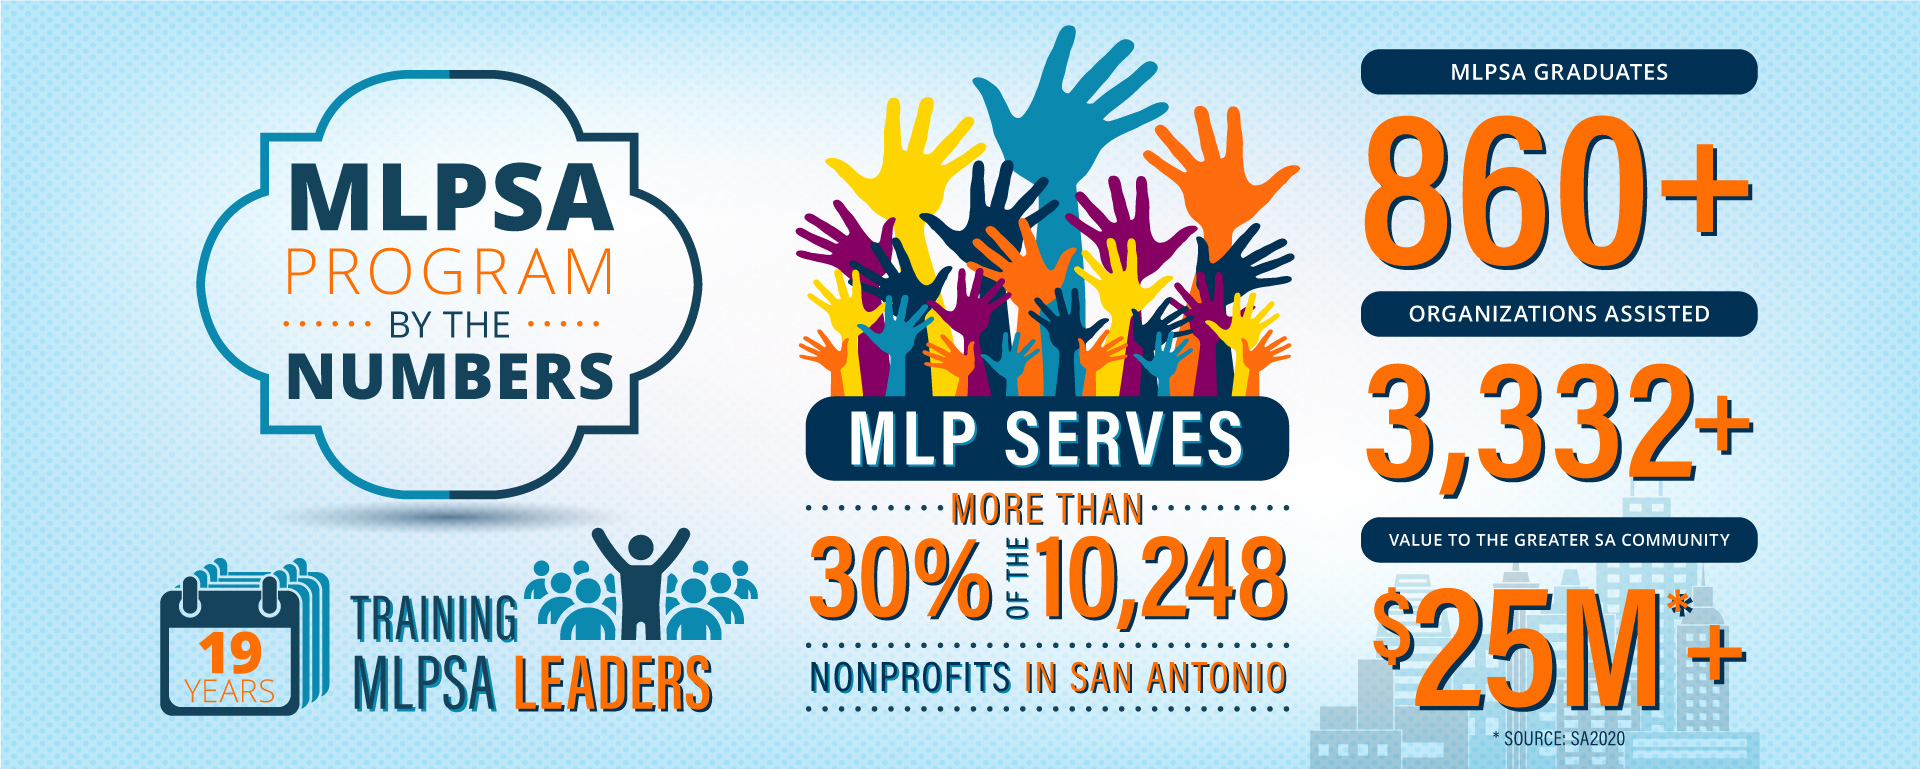 MLPSA Program by the Numbers